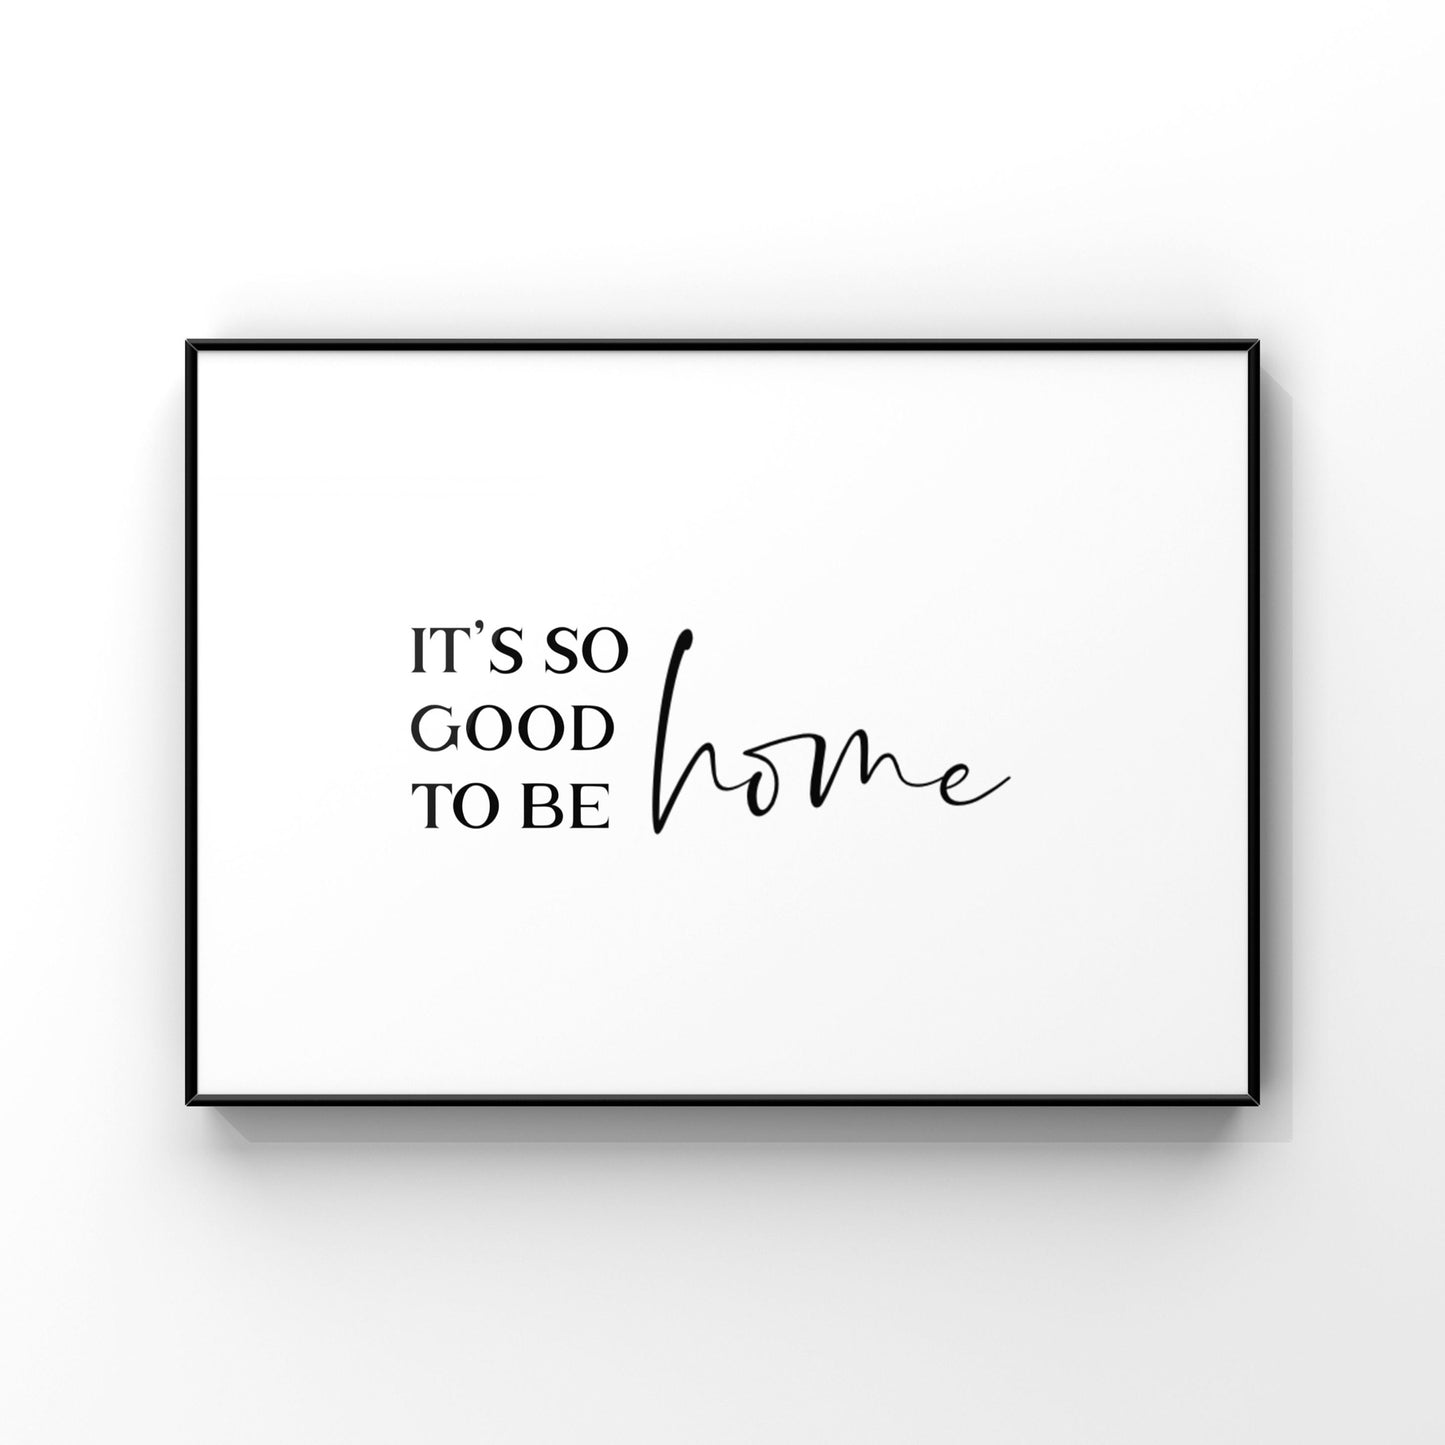 It’s so good to be home, It’s so good to be home print, It’s so good to be home sign, Home Decor Wall Art, It’s good to be home,Living Room